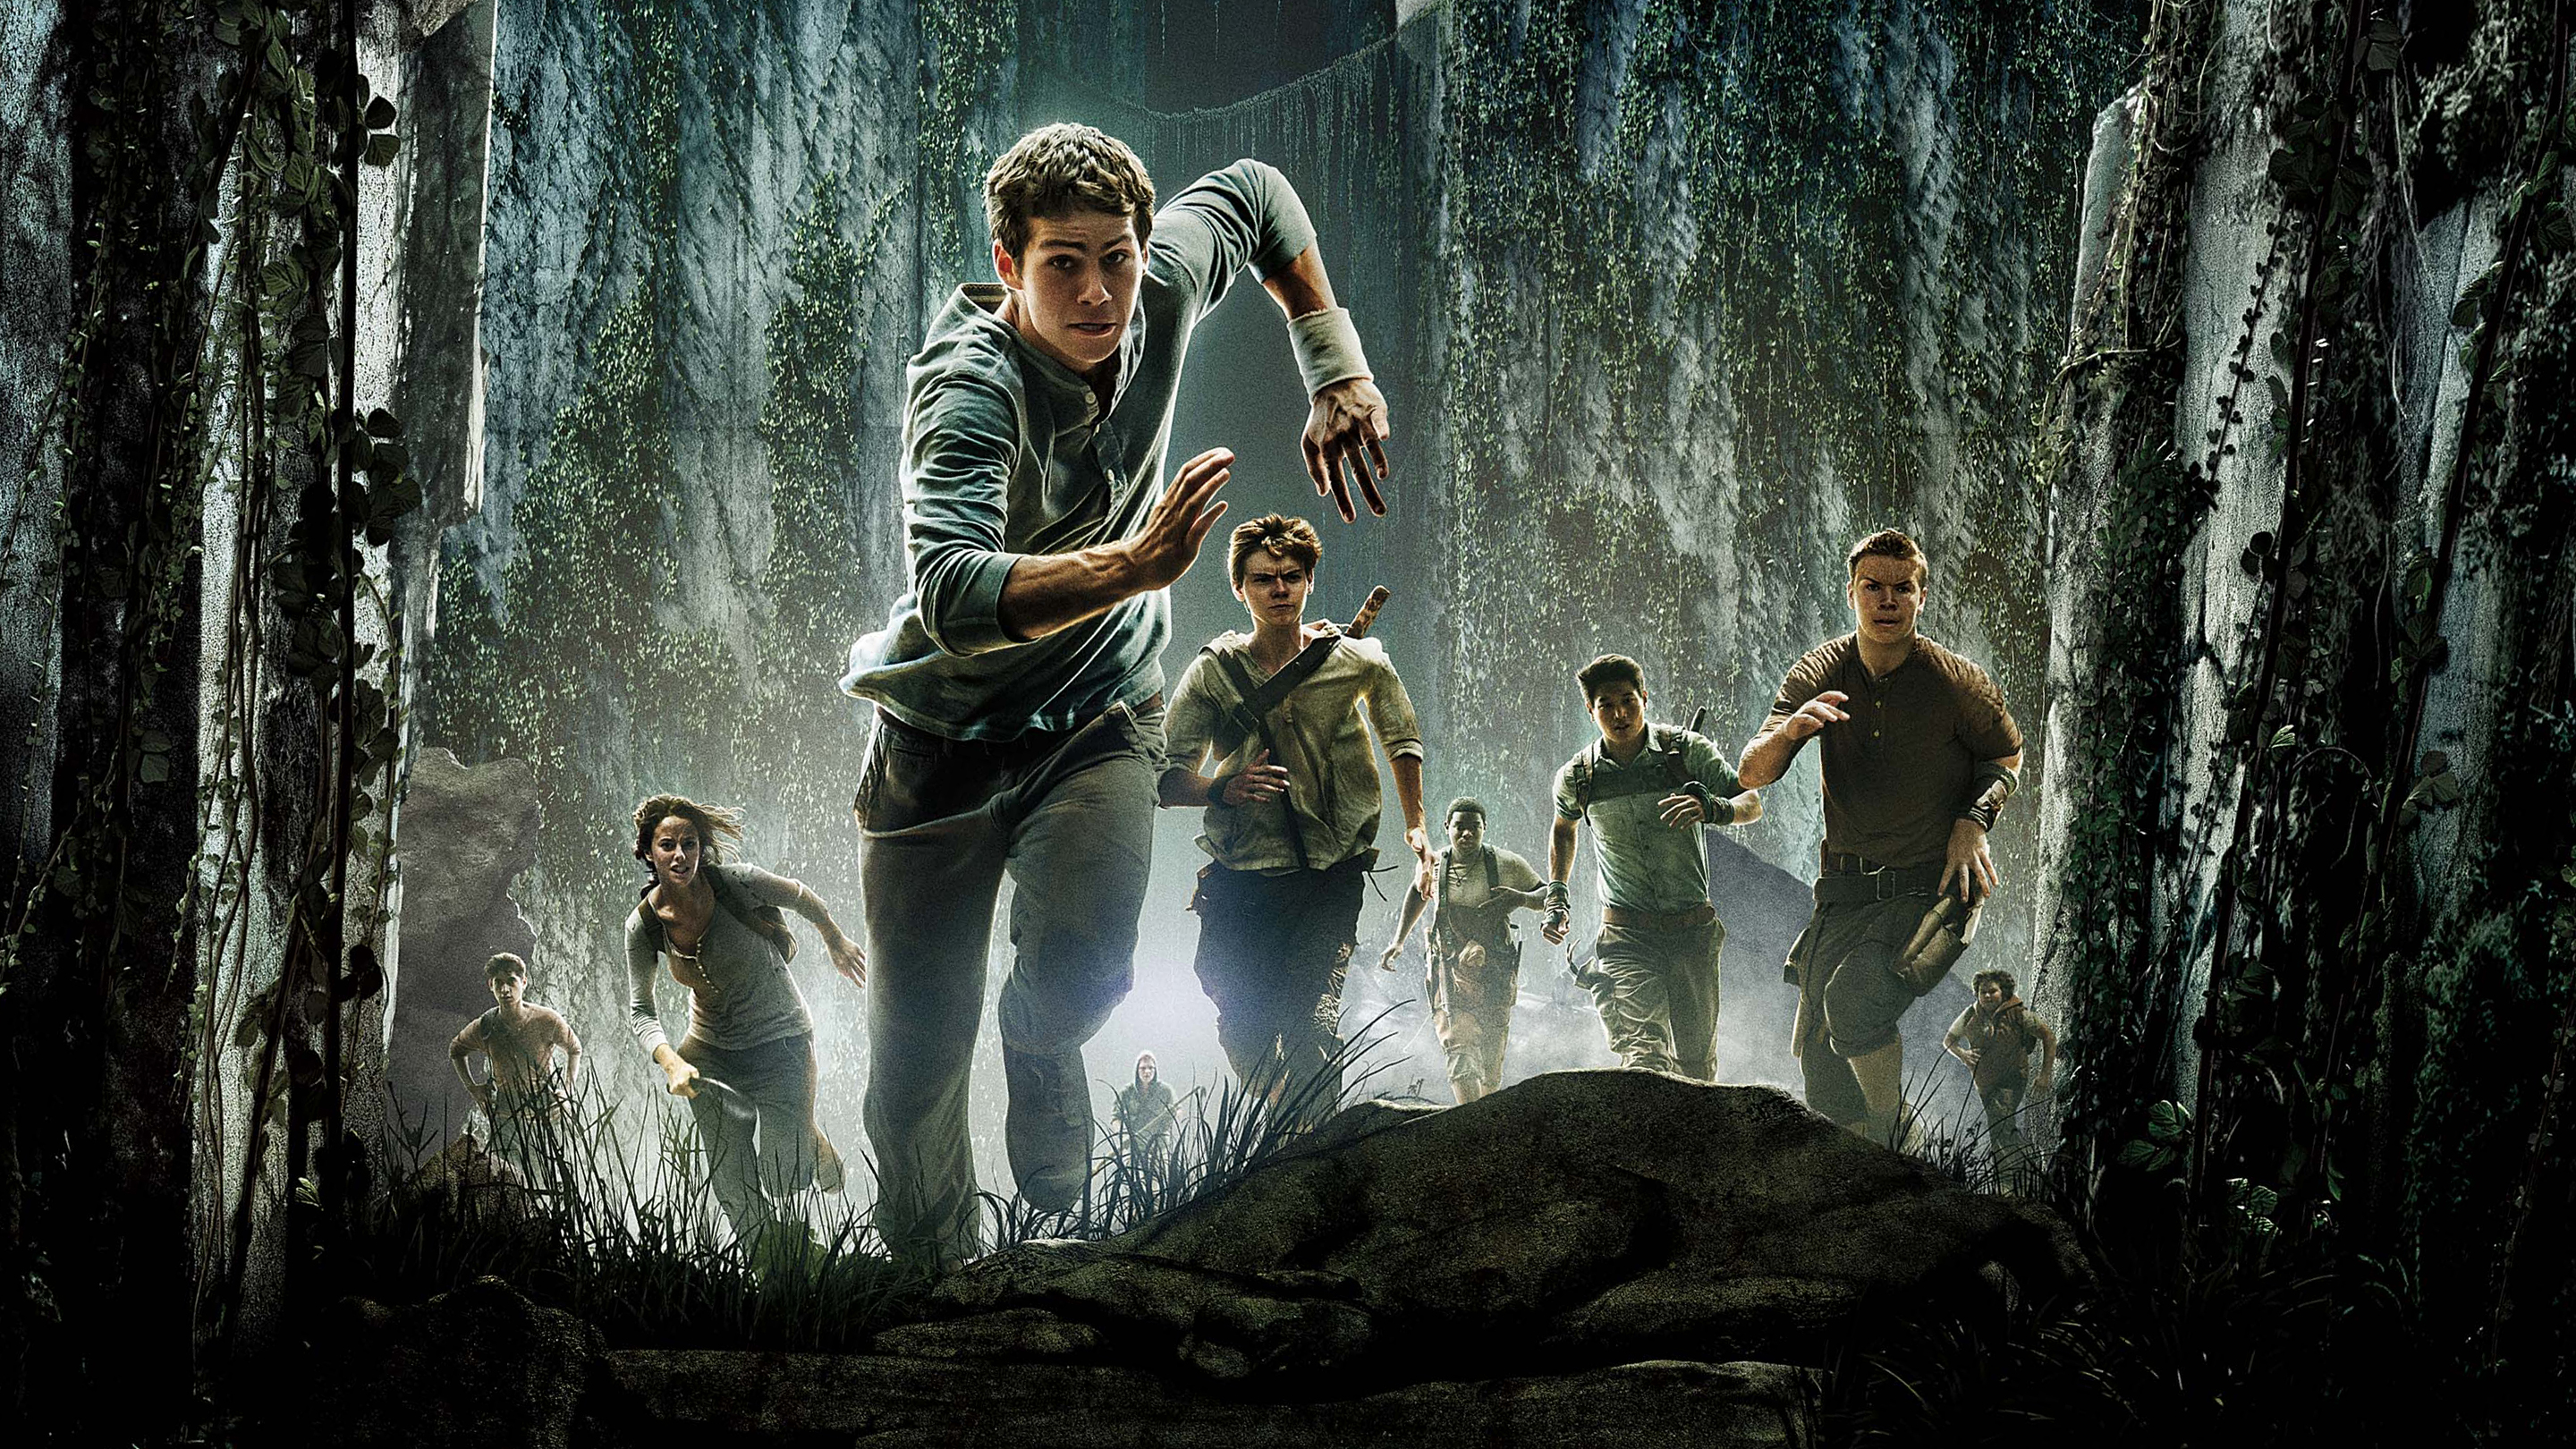 Newt being chased by a Griever in the maze runner mobile game